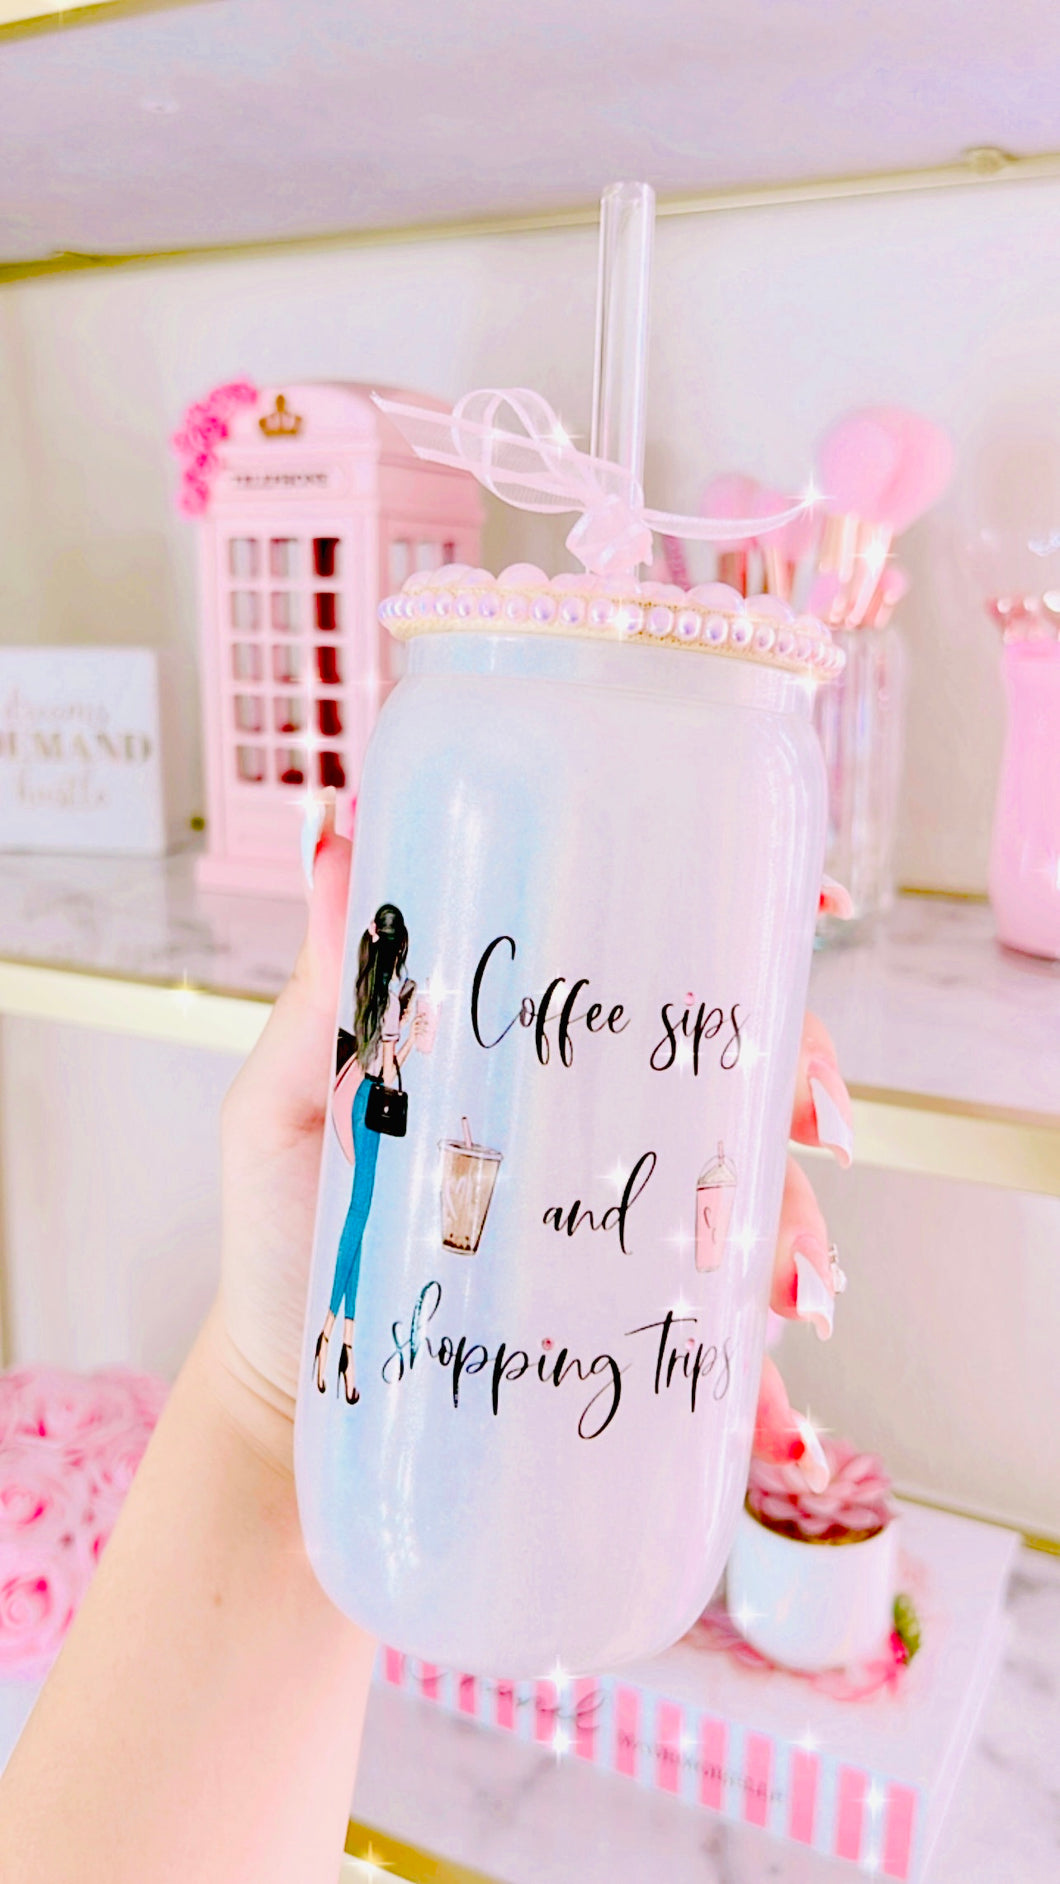 Coffee sips and shopping trips glass can